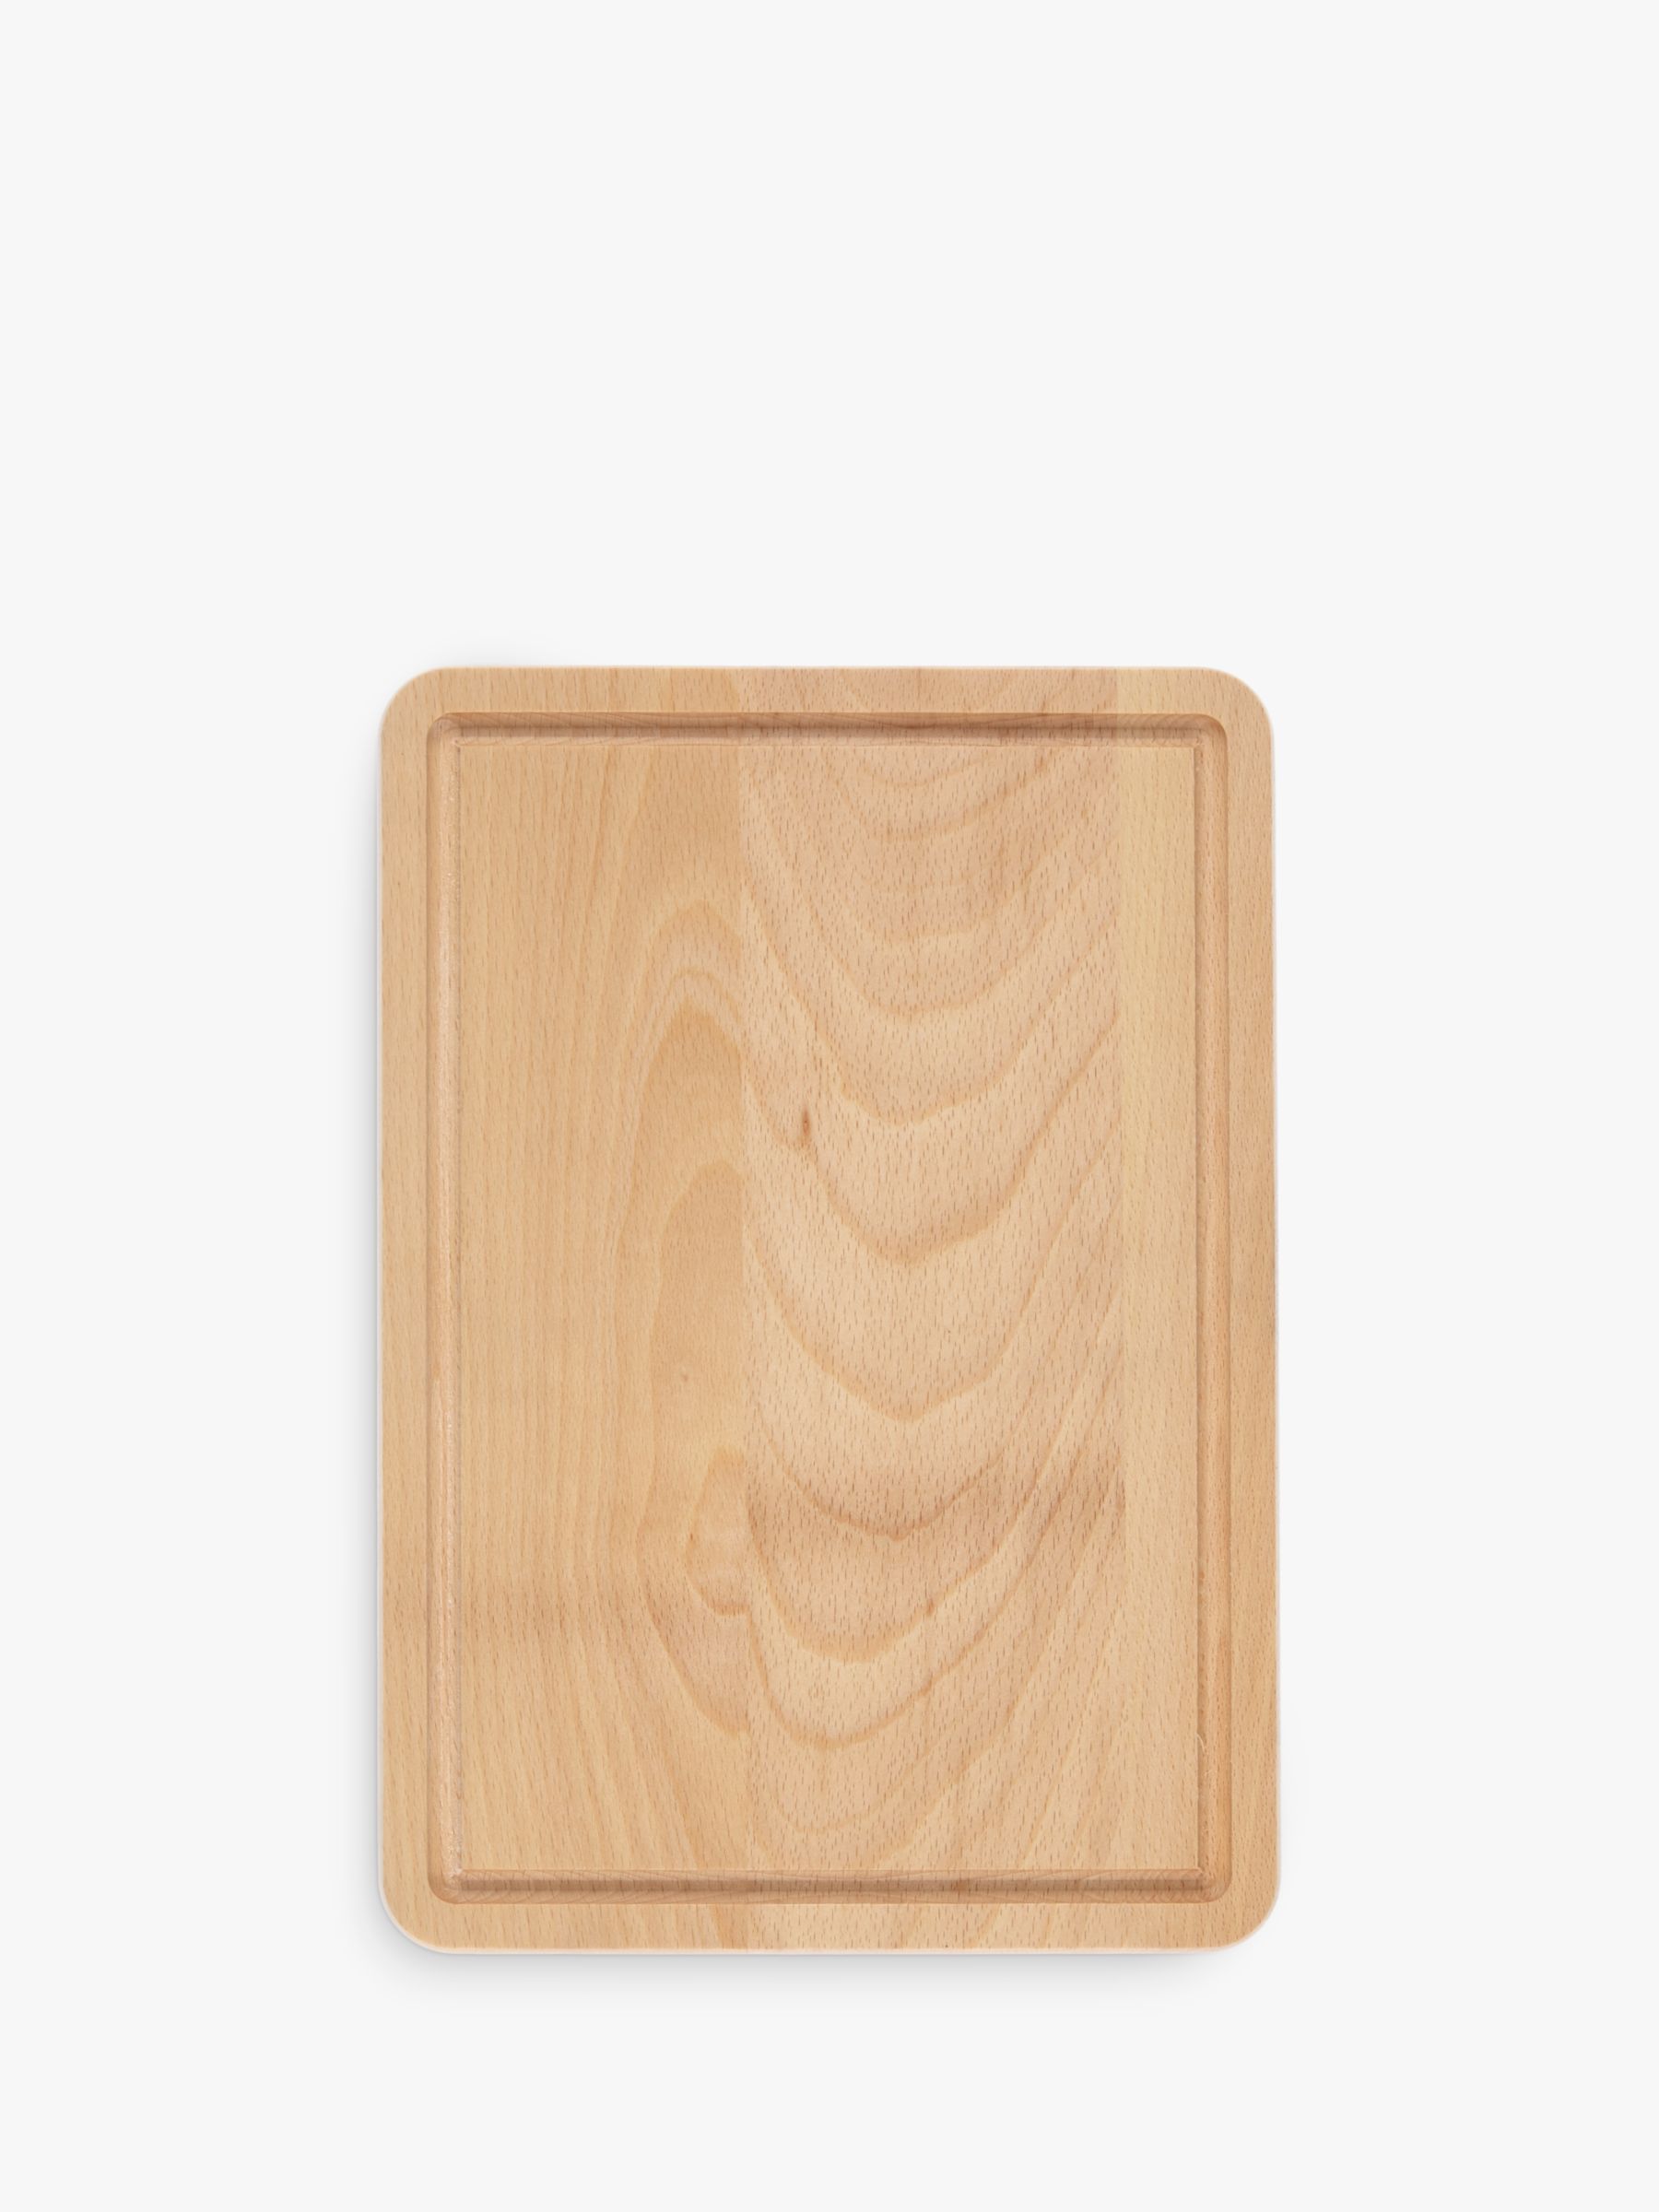 Wooden Chopping Board Top View stock illustrations